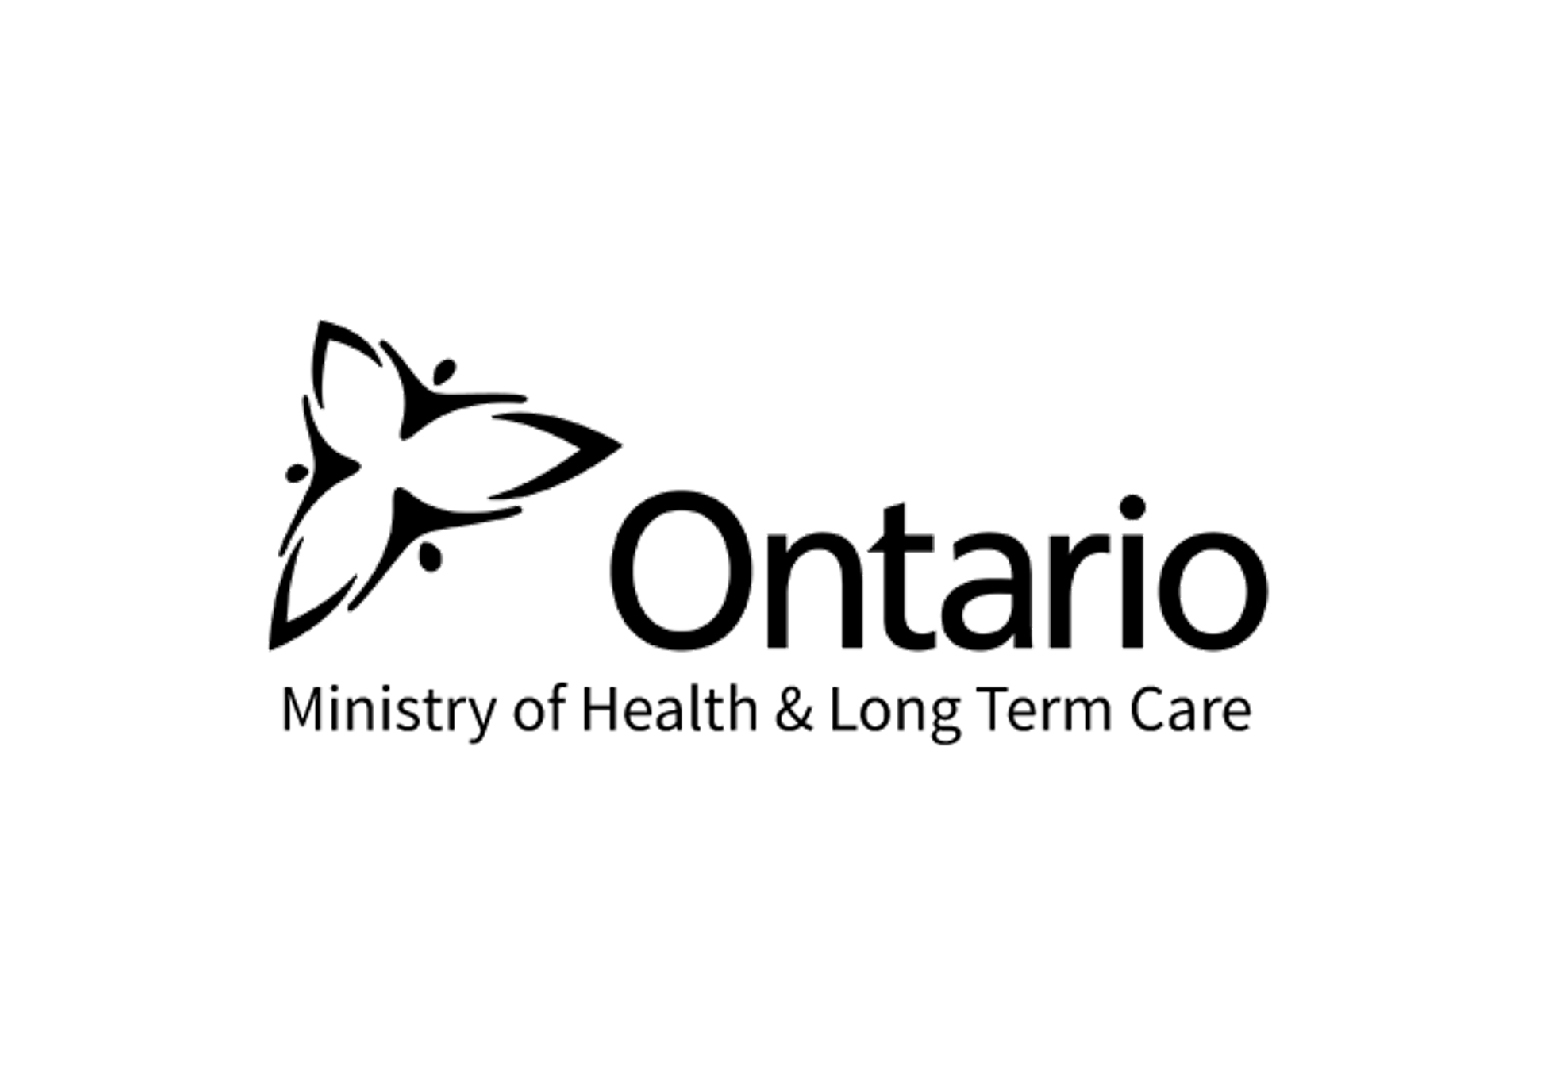 Ministry of Health and Long-Term Care, Ontario